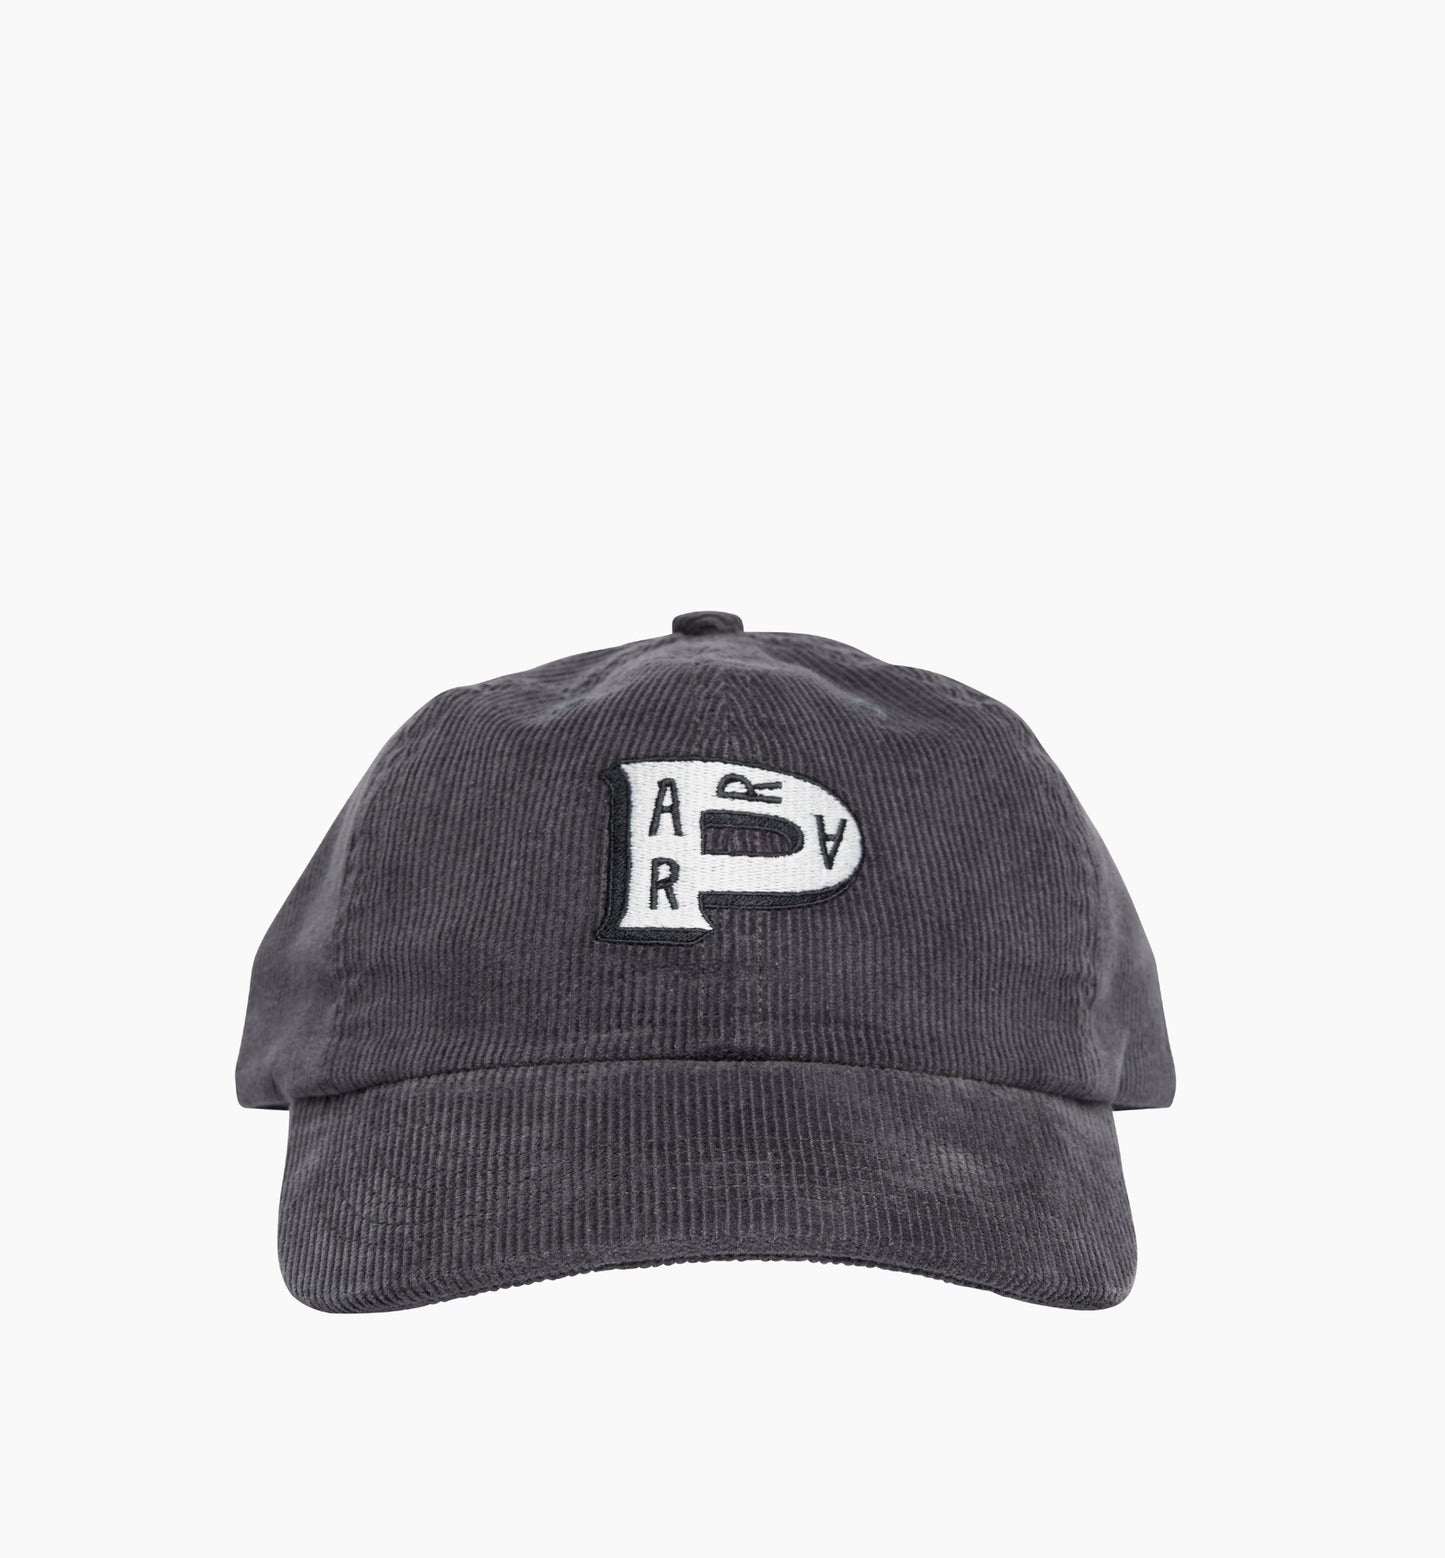 By Parra Worked P 6 Panel Hat Stone Grey